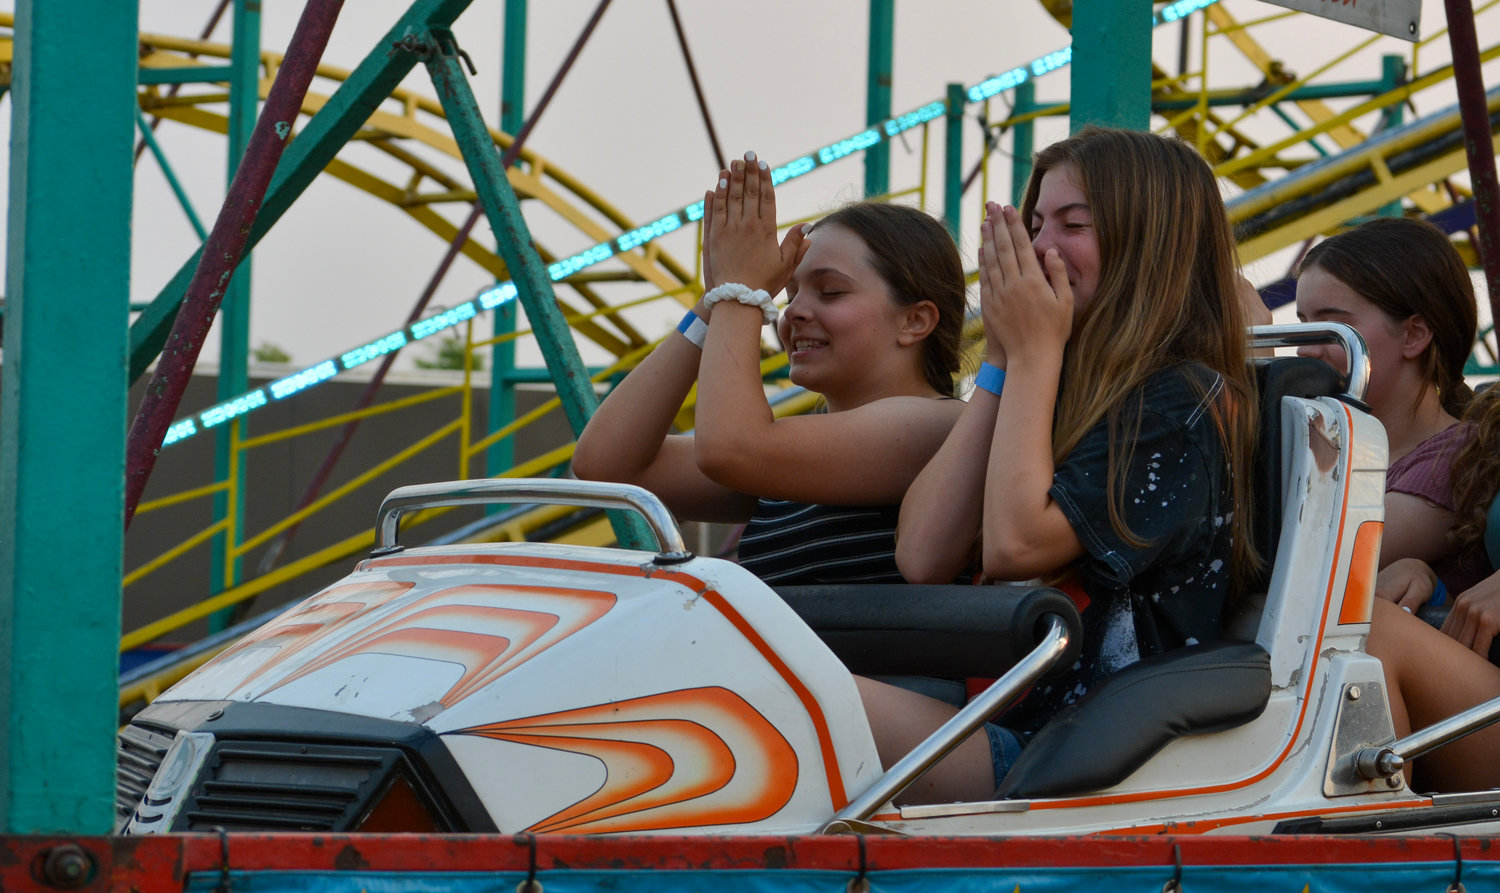 Attendees sit in an amusement park ride during the Family Fun Series event on Aug. 13.